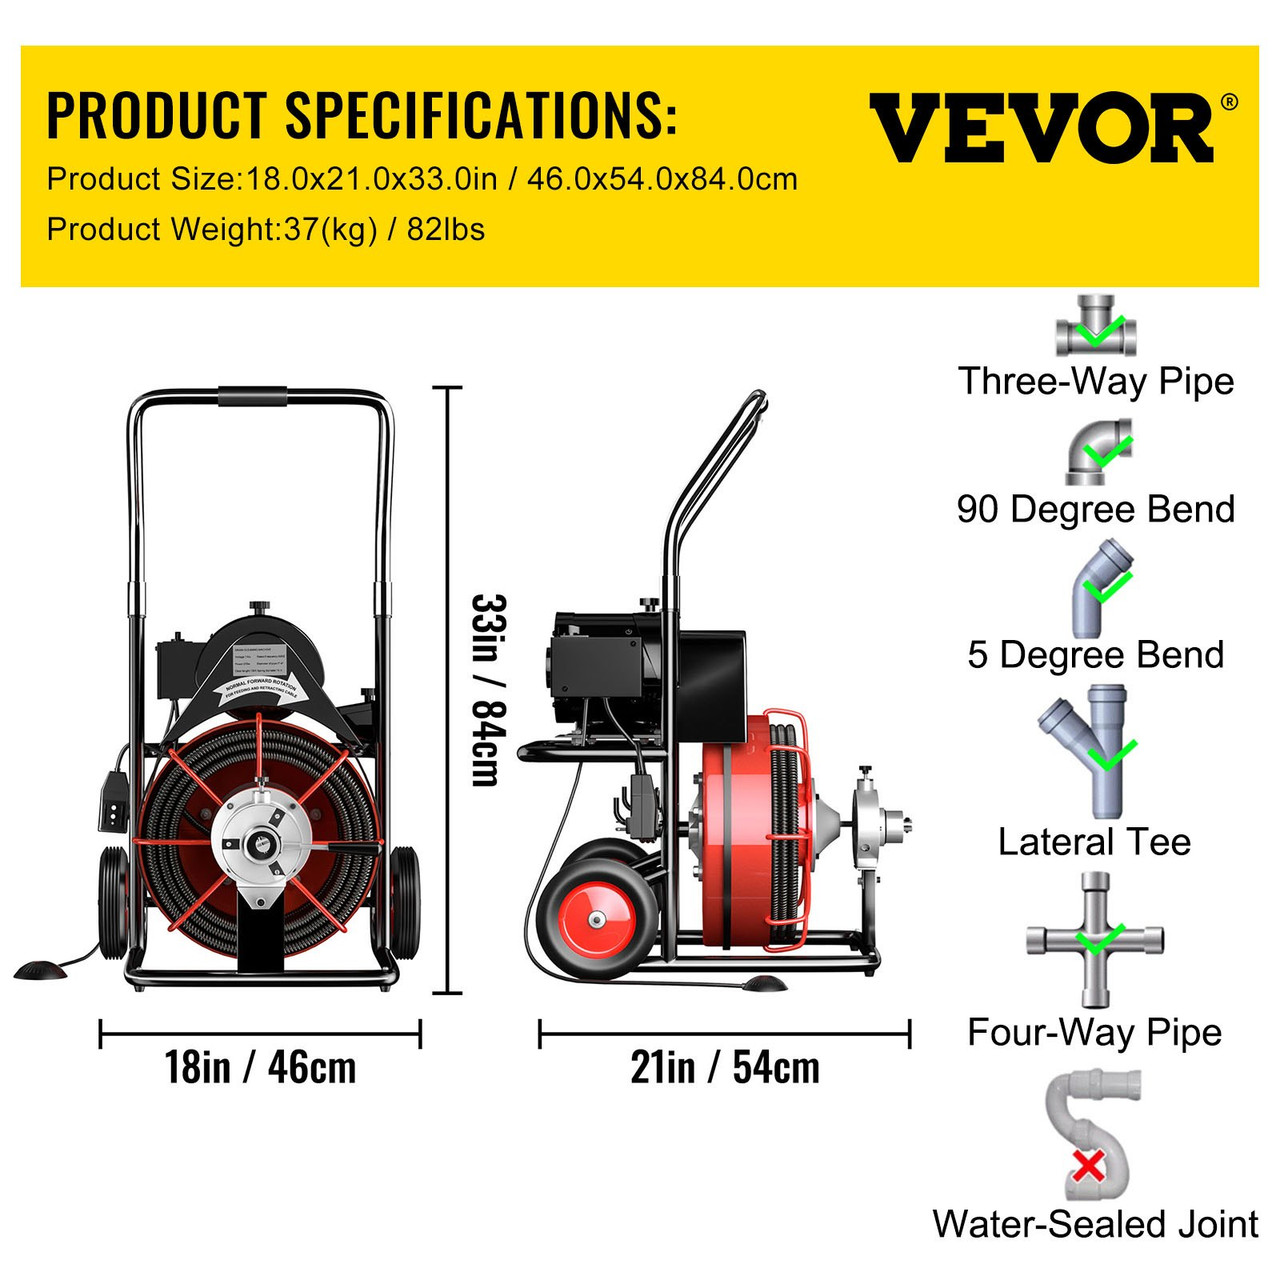 75 Ft x 3/8Inch Drain Cleaner Machine Auto Feed fit 1"(25mm) to 4"(100mm) Pipes 370W Open Drain Cleaning Machine Portable Electric Drain Auger with Cutters Glove Sewer Snake